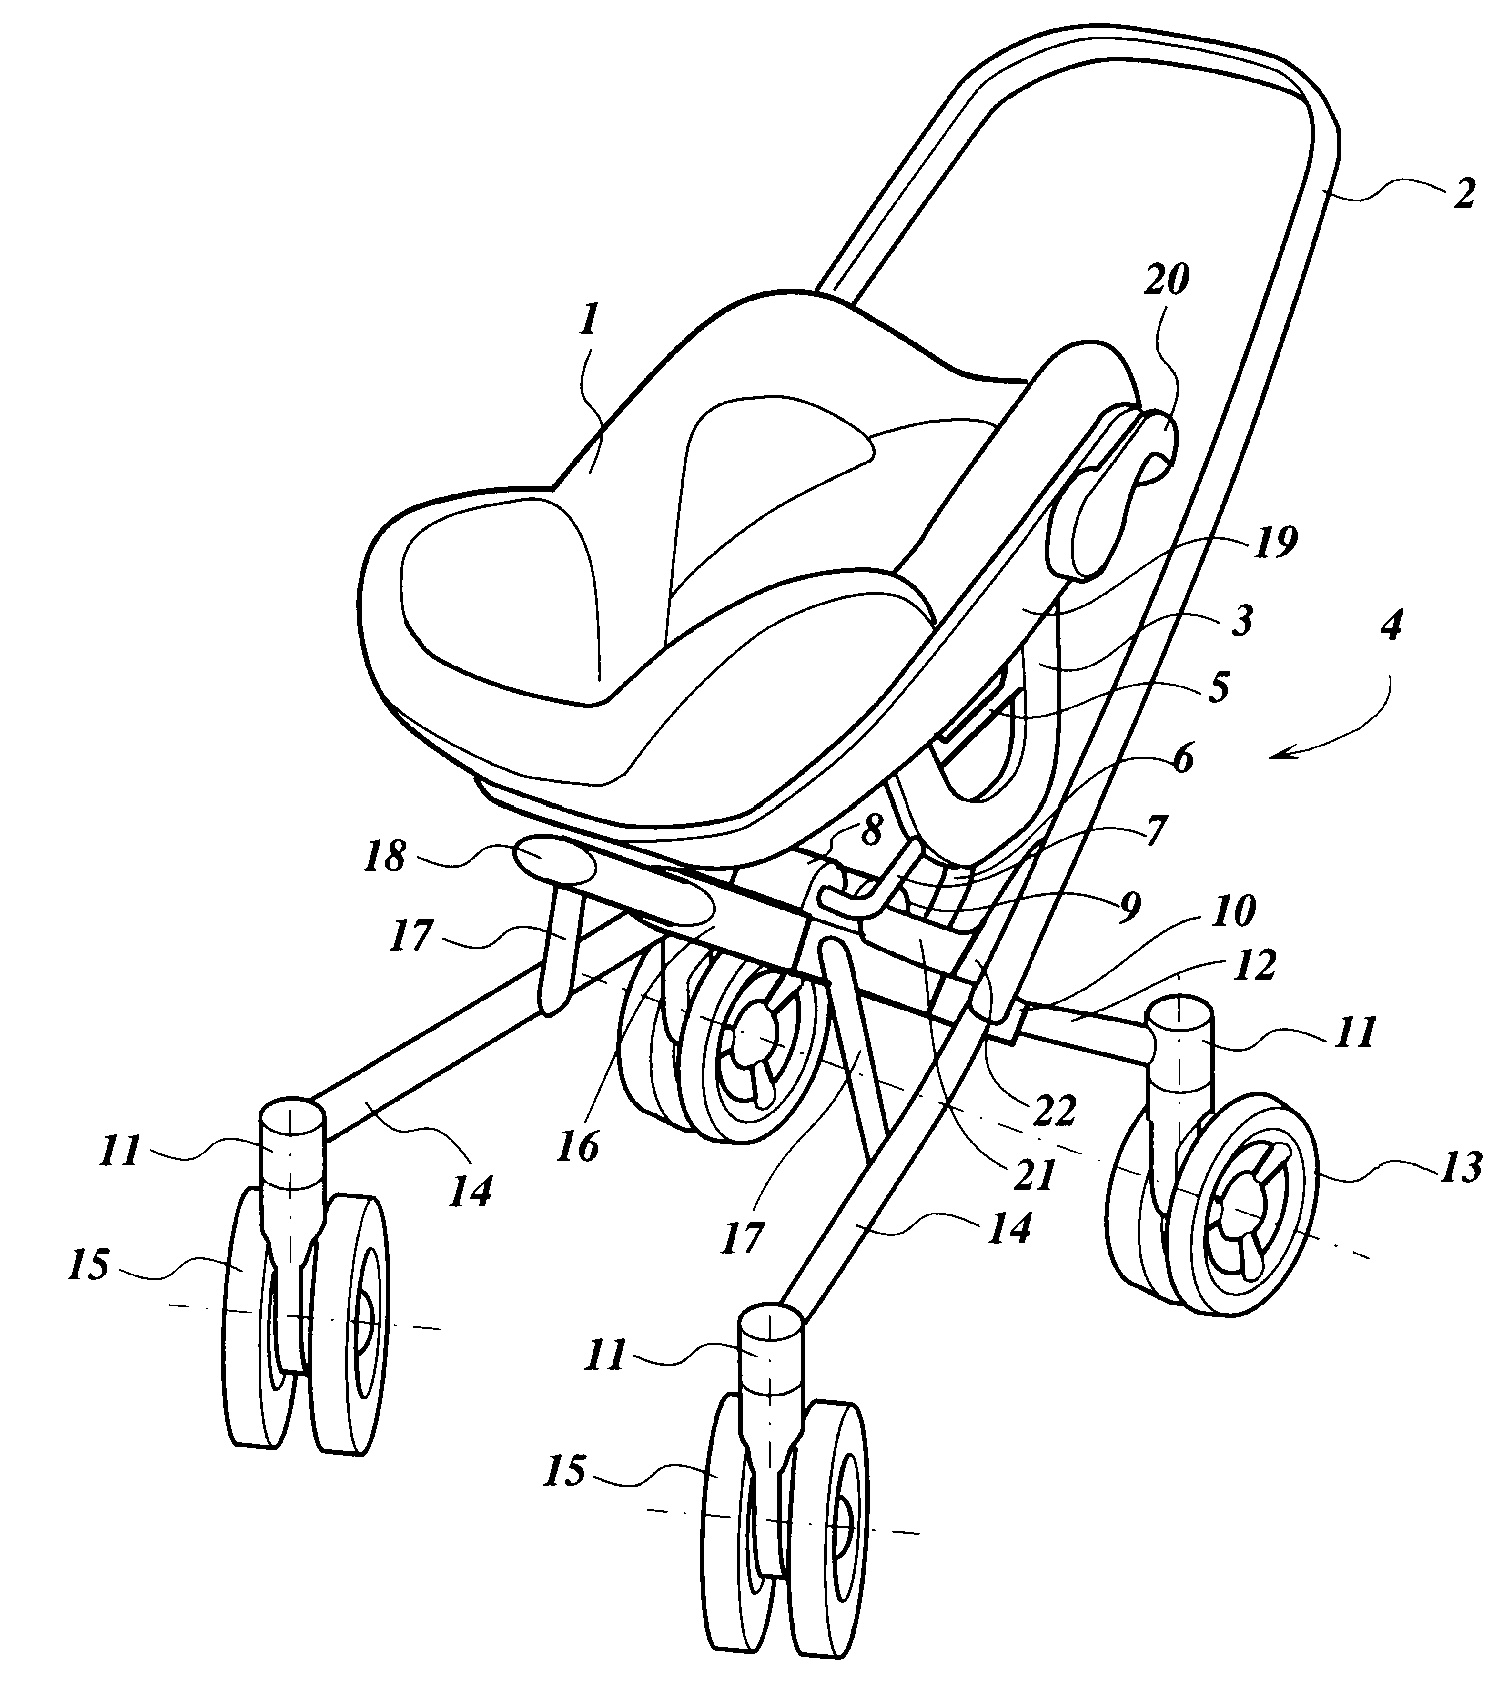 Device for transporting a child